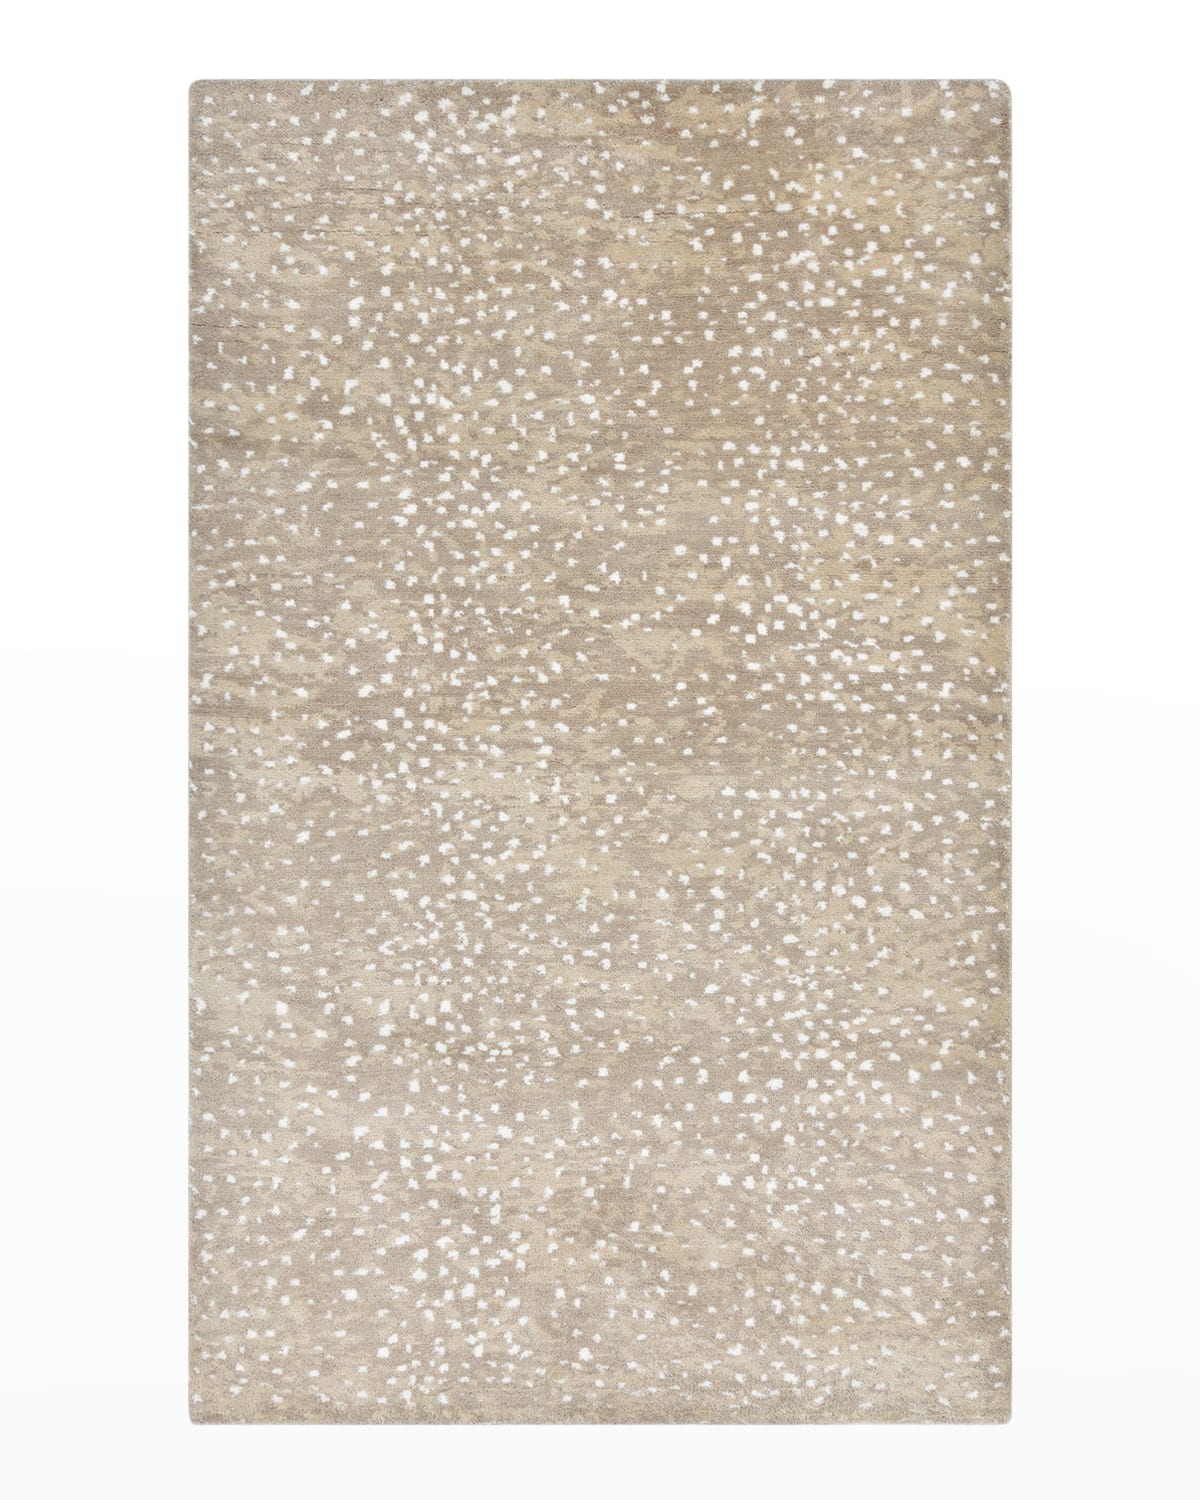 Solo Rugs Arash Hand-knotted Rug, Brown - 8' X 10'